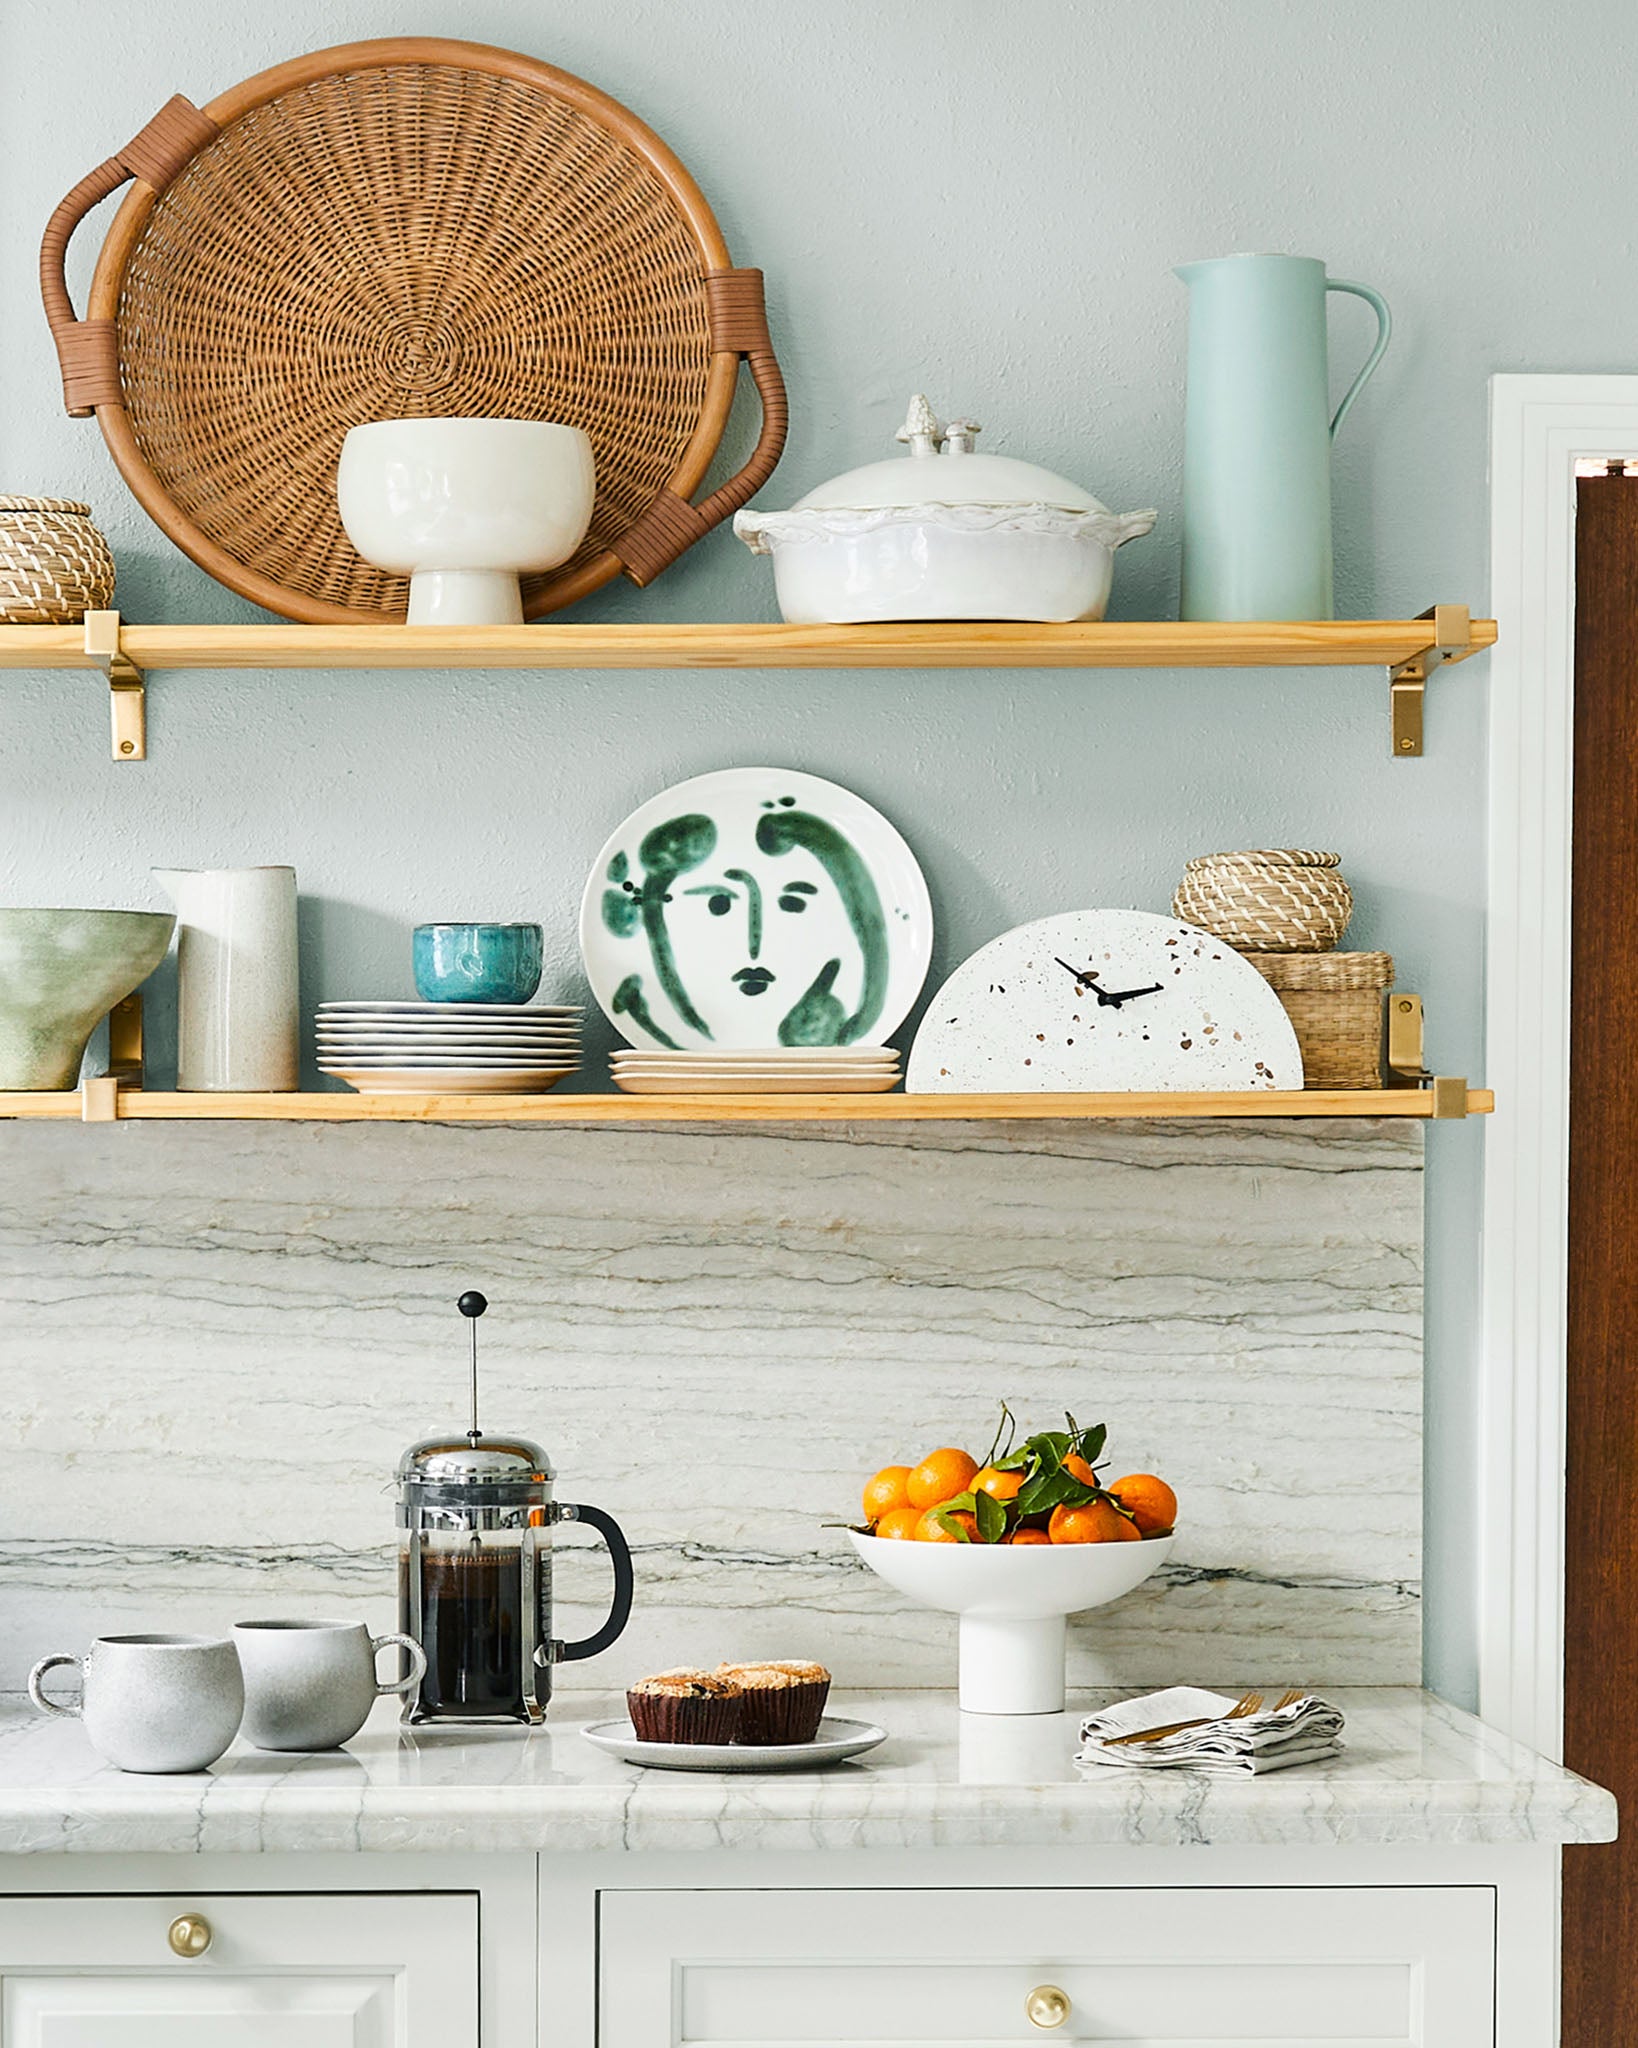 Go for floating shelves rather than pricey upper cabinets for a budget-friendly kitchen reno.